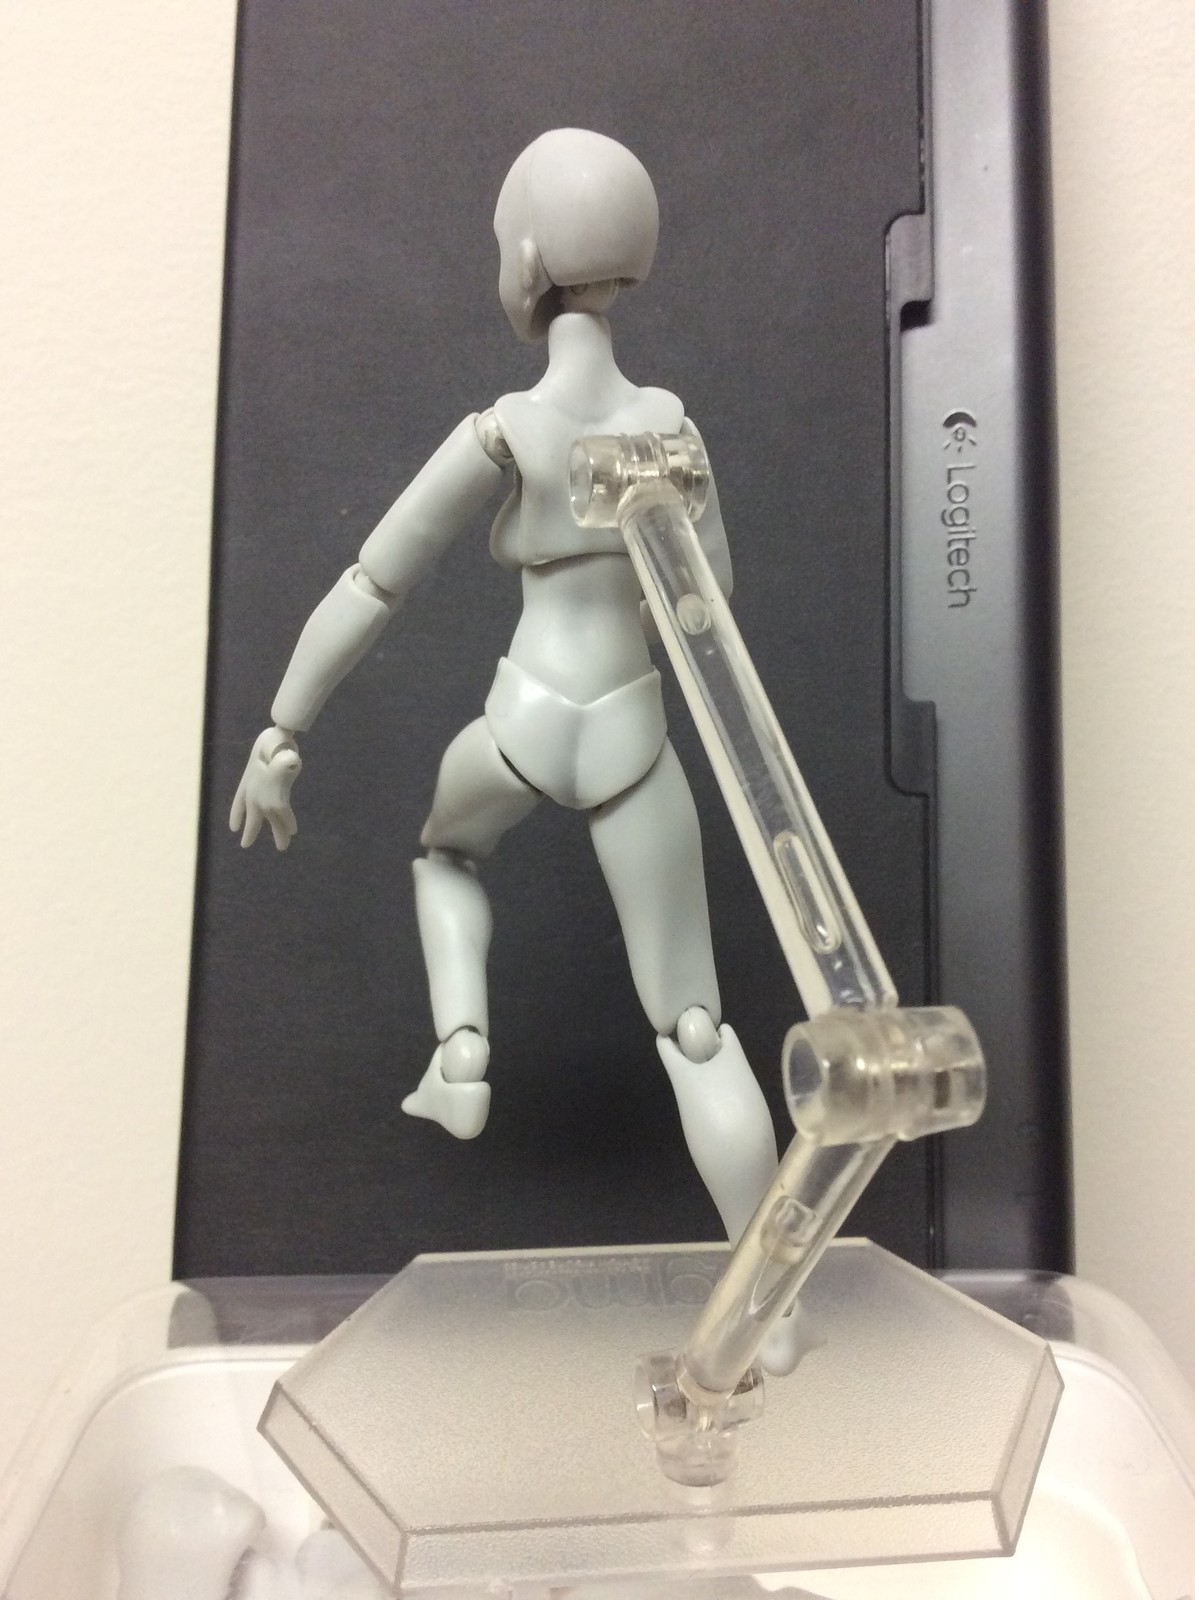 Figure pose reference (used in tandem with the other due to the support arm blocking view)